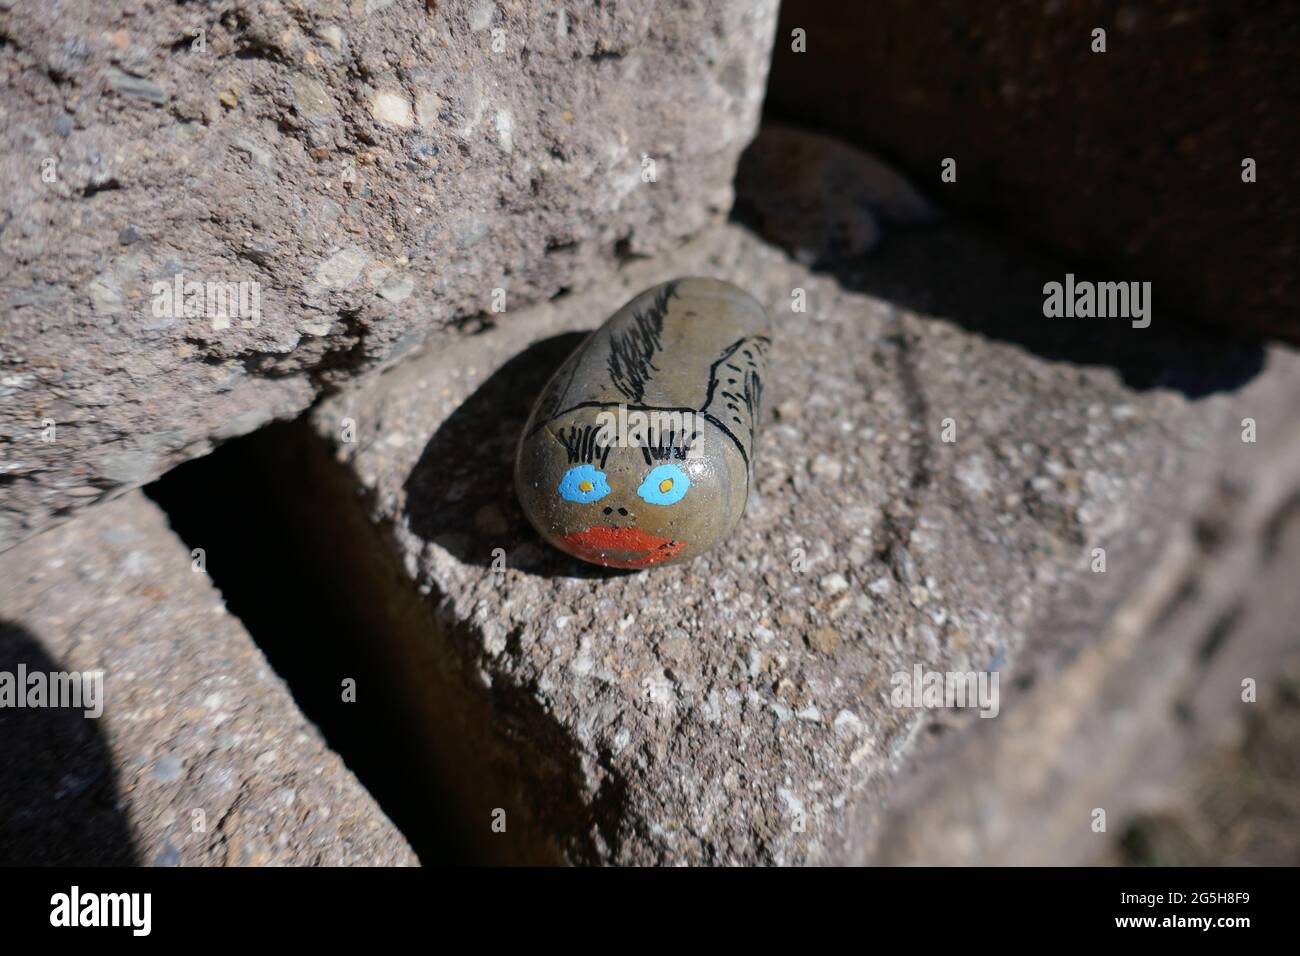 Kindness rock hidden with funny fish painted on Stock Photo